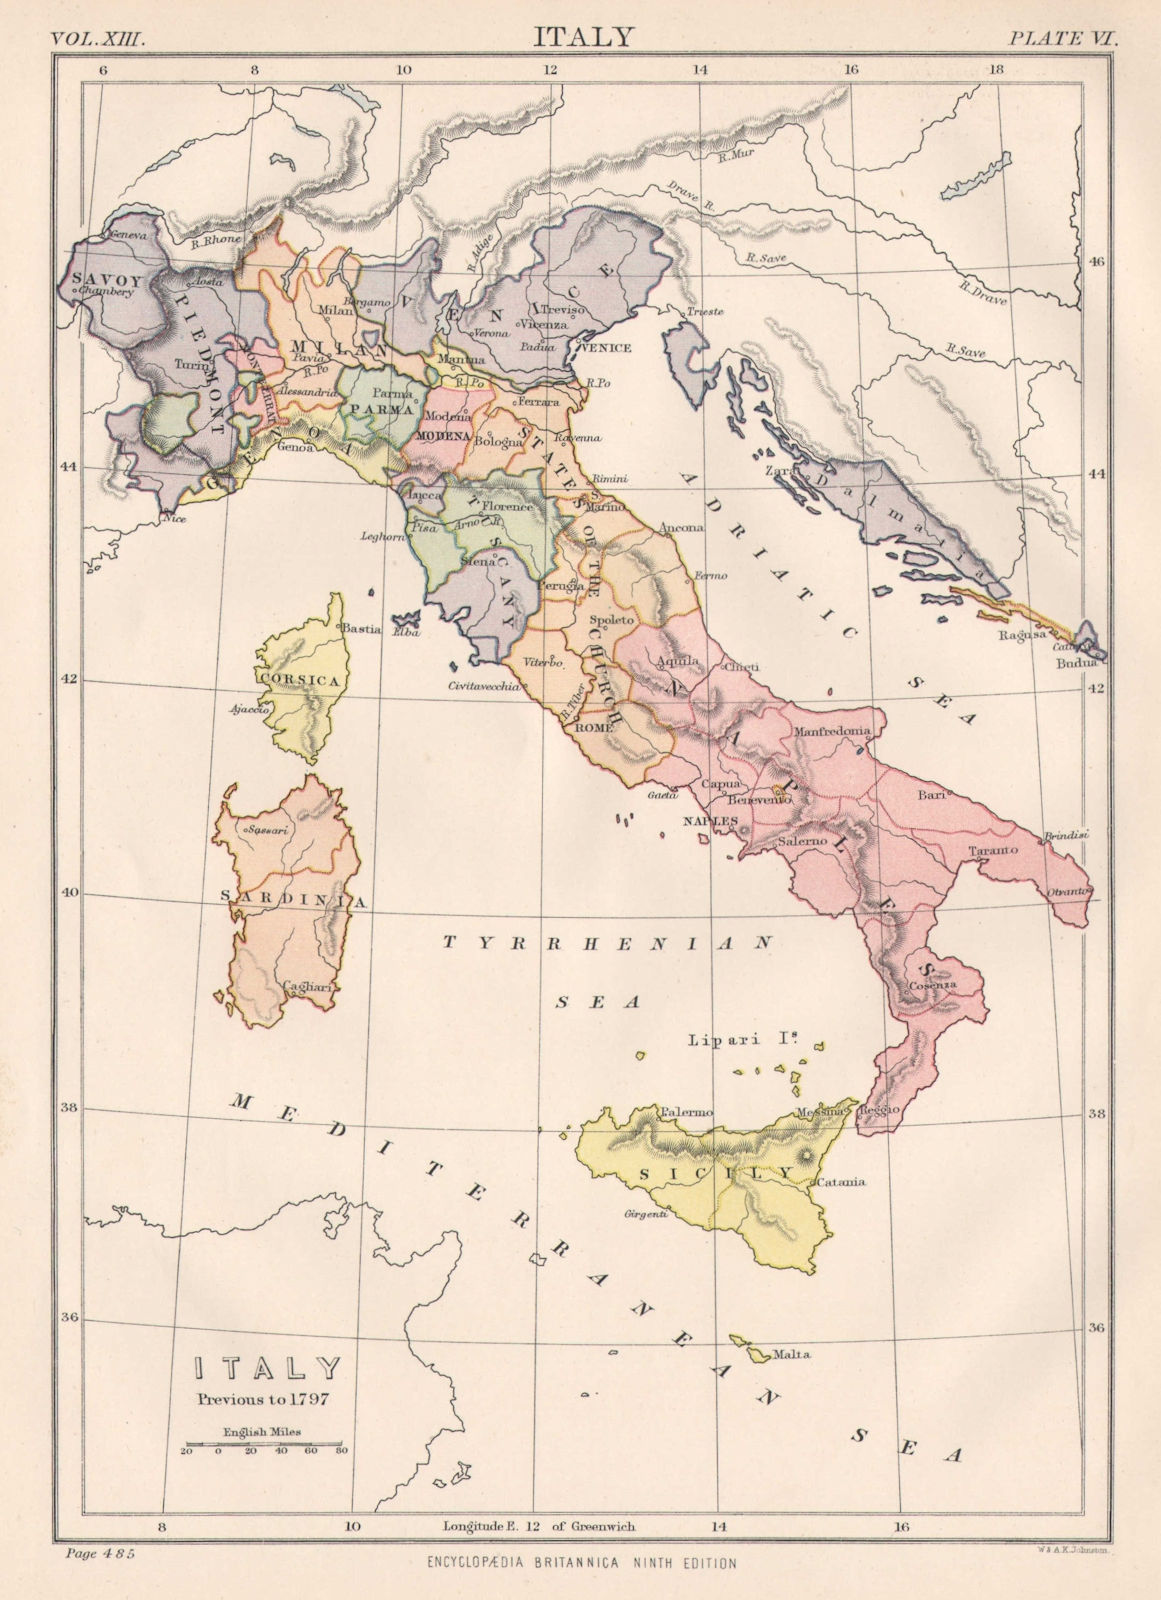 ITALY BEFORE 1797. Naples Papal States Venice Milan Piedmont Tuscany 1898 map